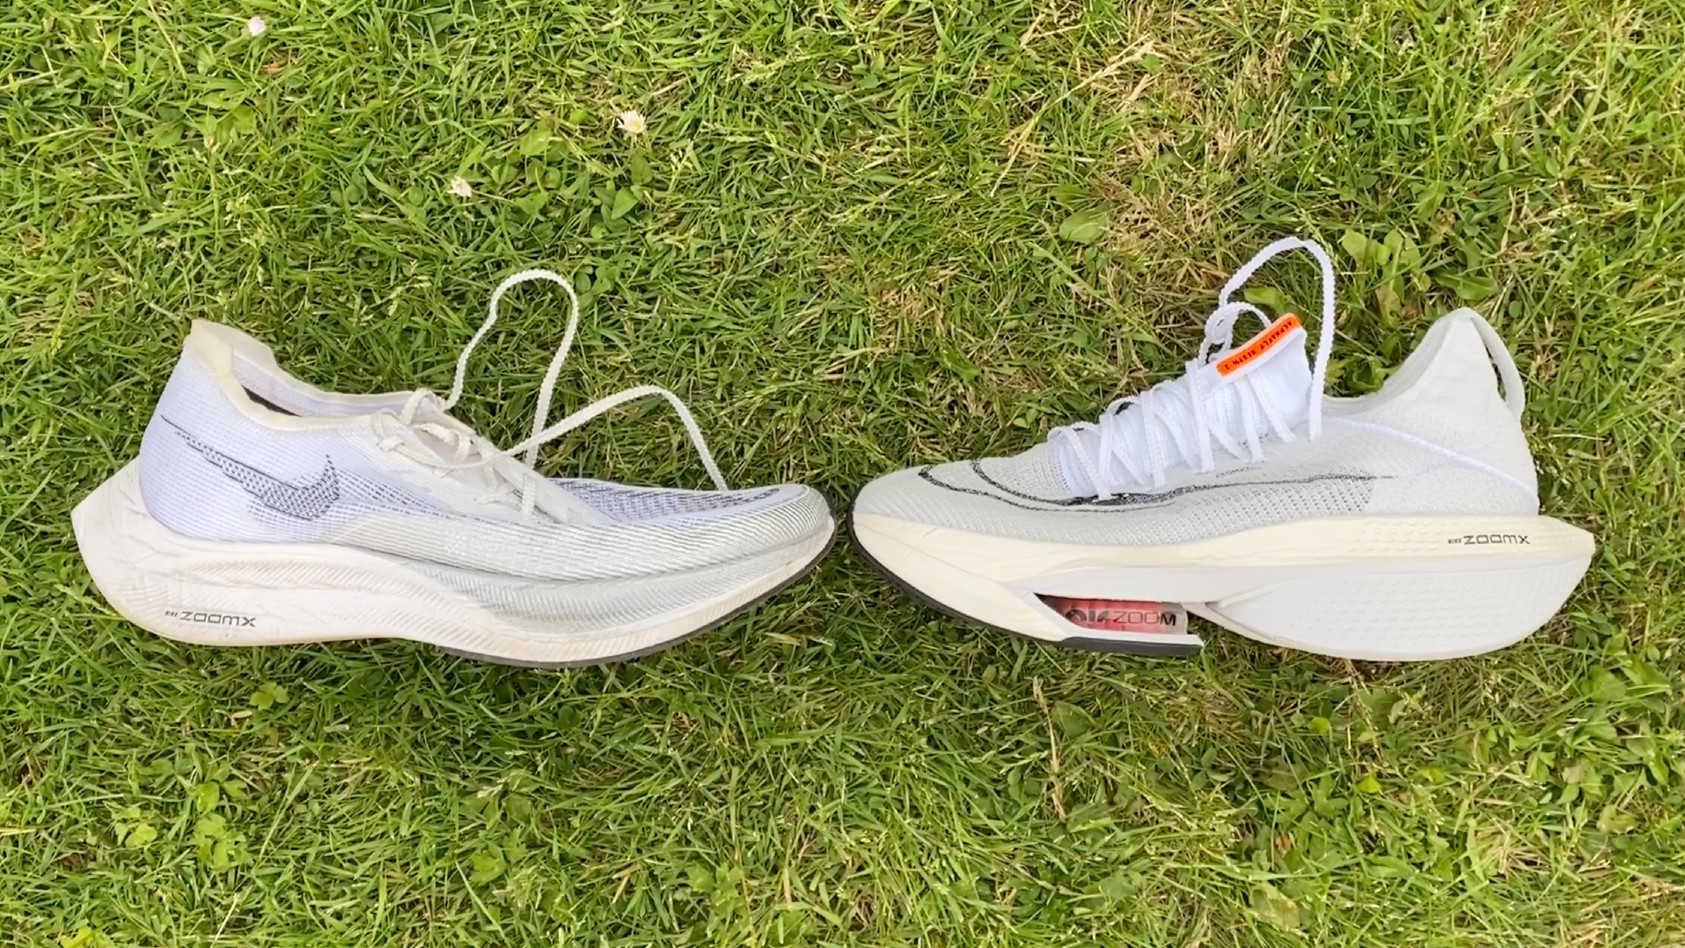 petticoat Playground equipment Moderator Nike Air Zoom Alphafly NEXT% 2 Vs Nike ZoomX Vaporfly NEXT% 2: Nike's Top  Carbon Racers Compared | Coach